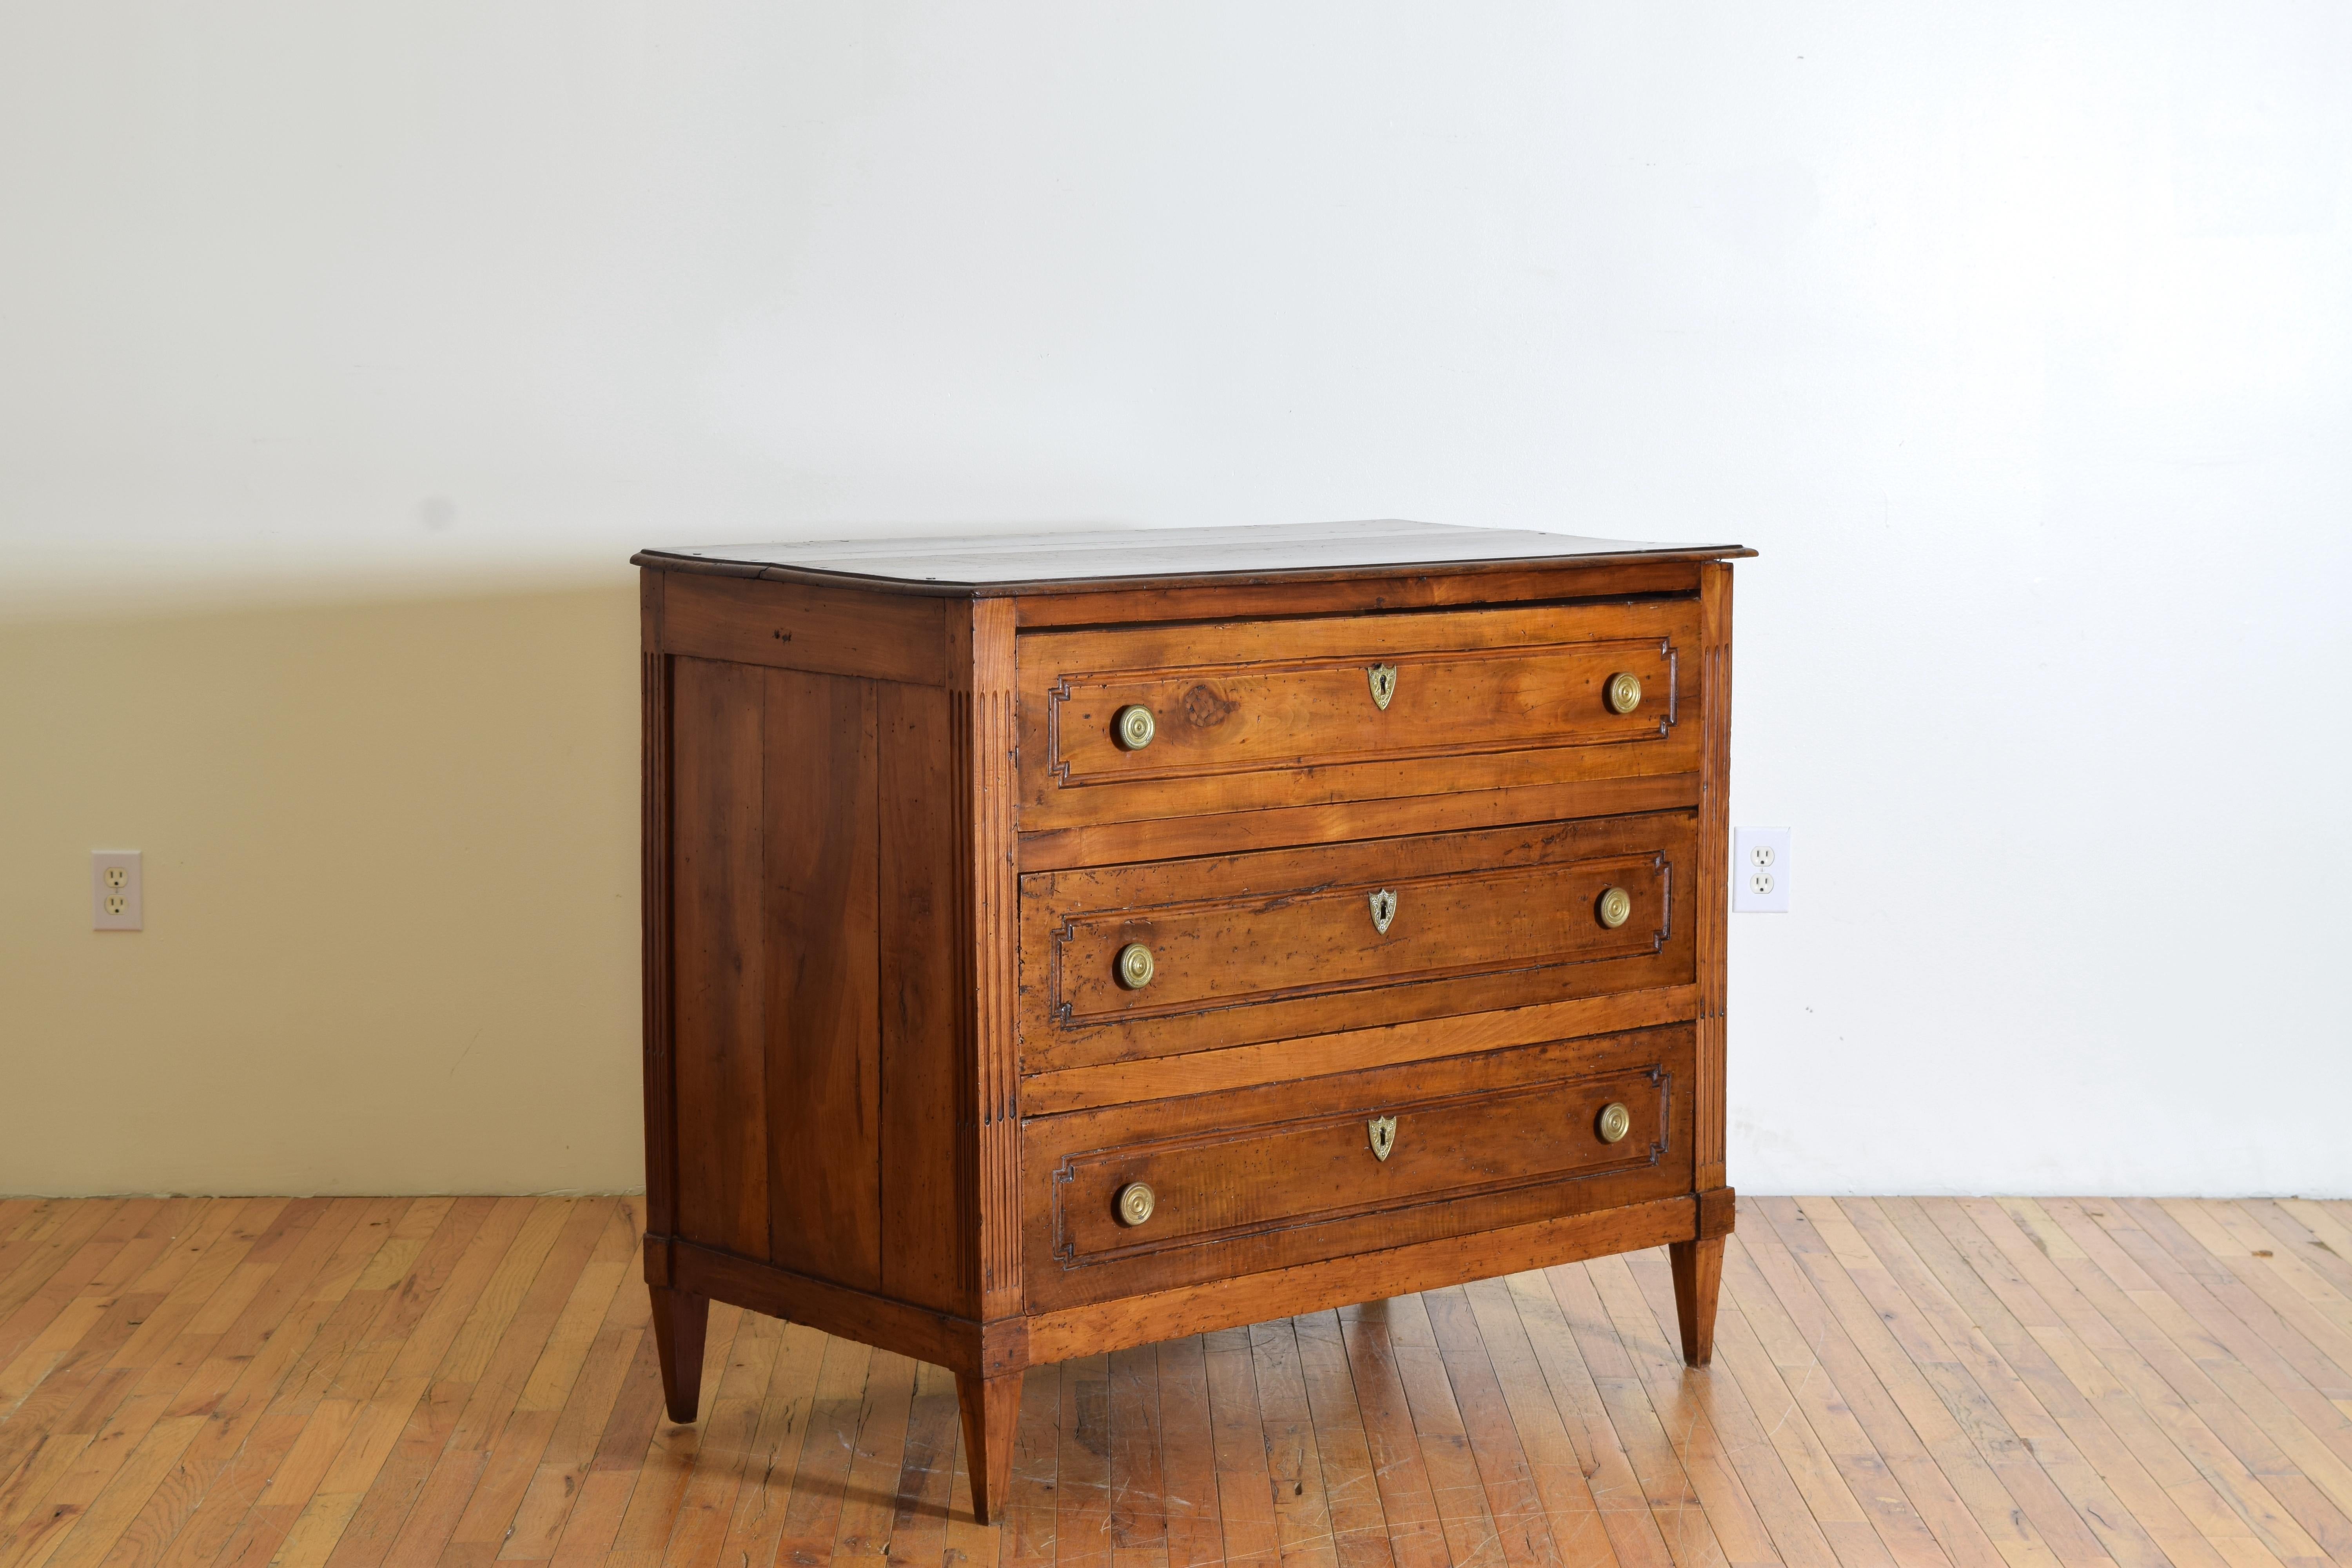 Having a two board rectangular top above a conforming case with fluted corners front and back, the three drawers with carved panels, circular brass pulls and brass escutcheons, raised on square tapering legs